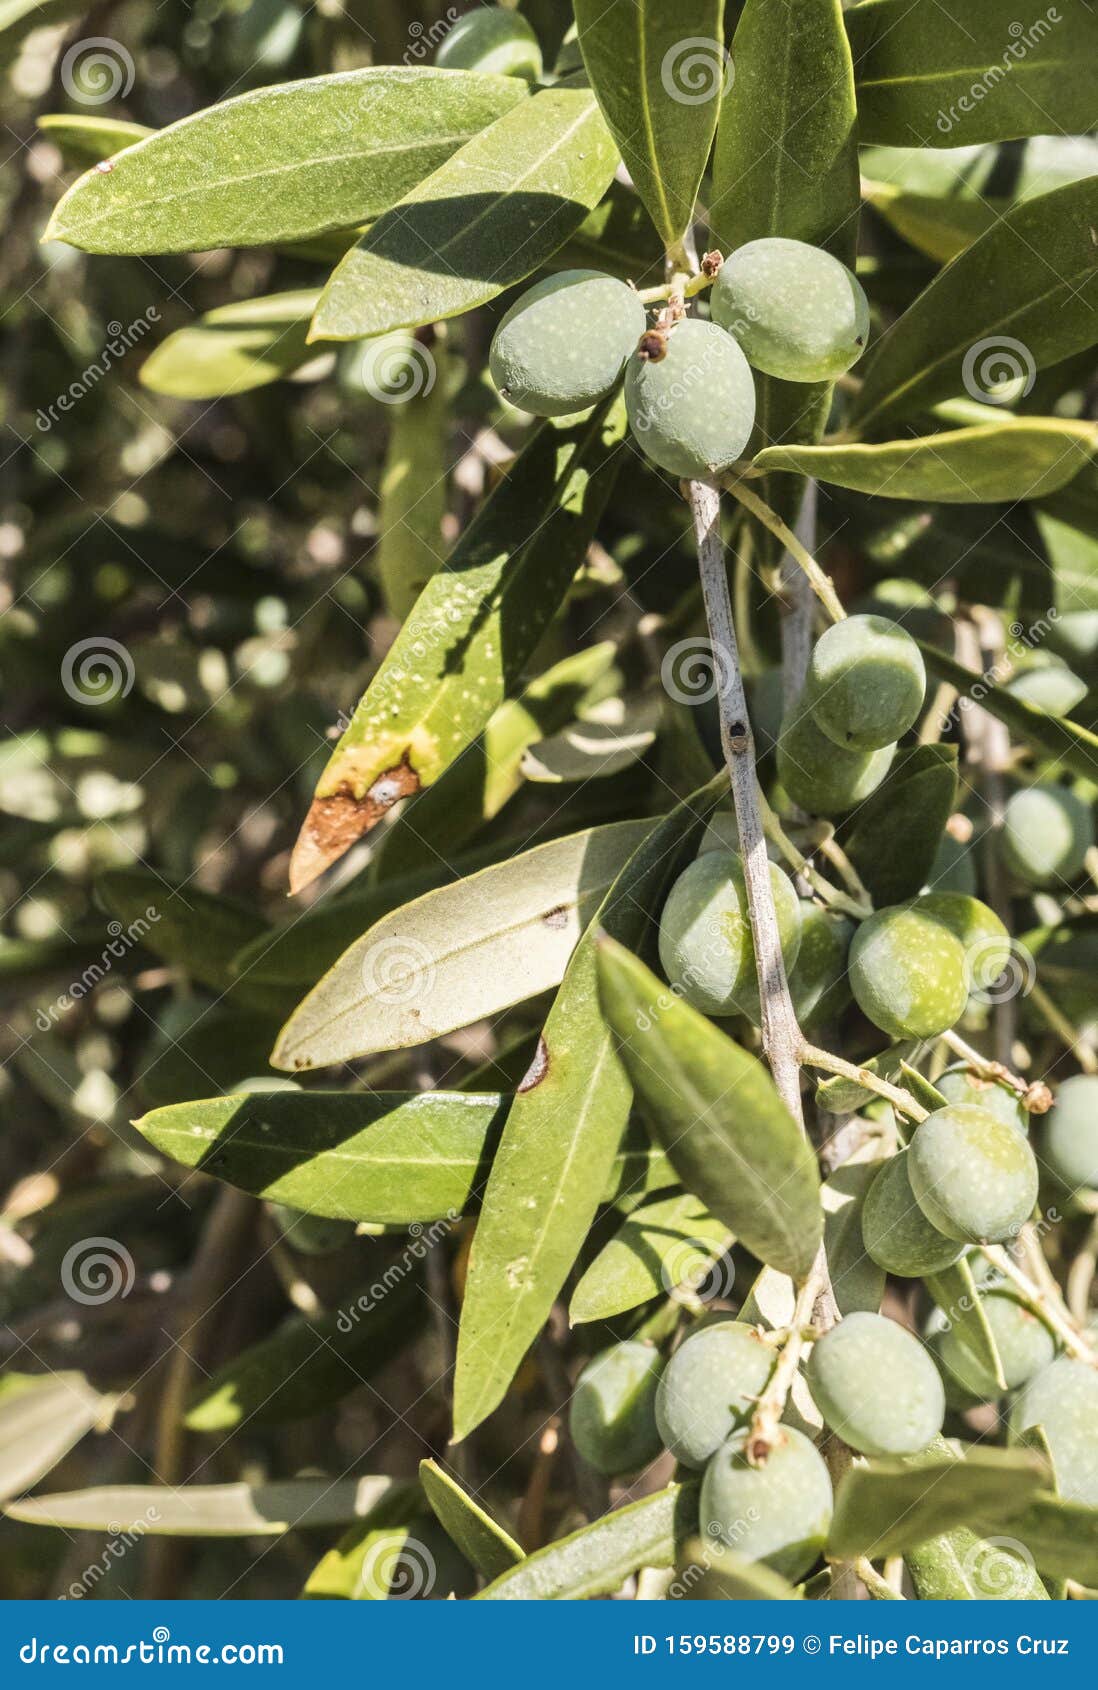 olive trees infected by the dreaded bacteria called xylella fastidiosa, is known in europe as the ebola of the olive tree